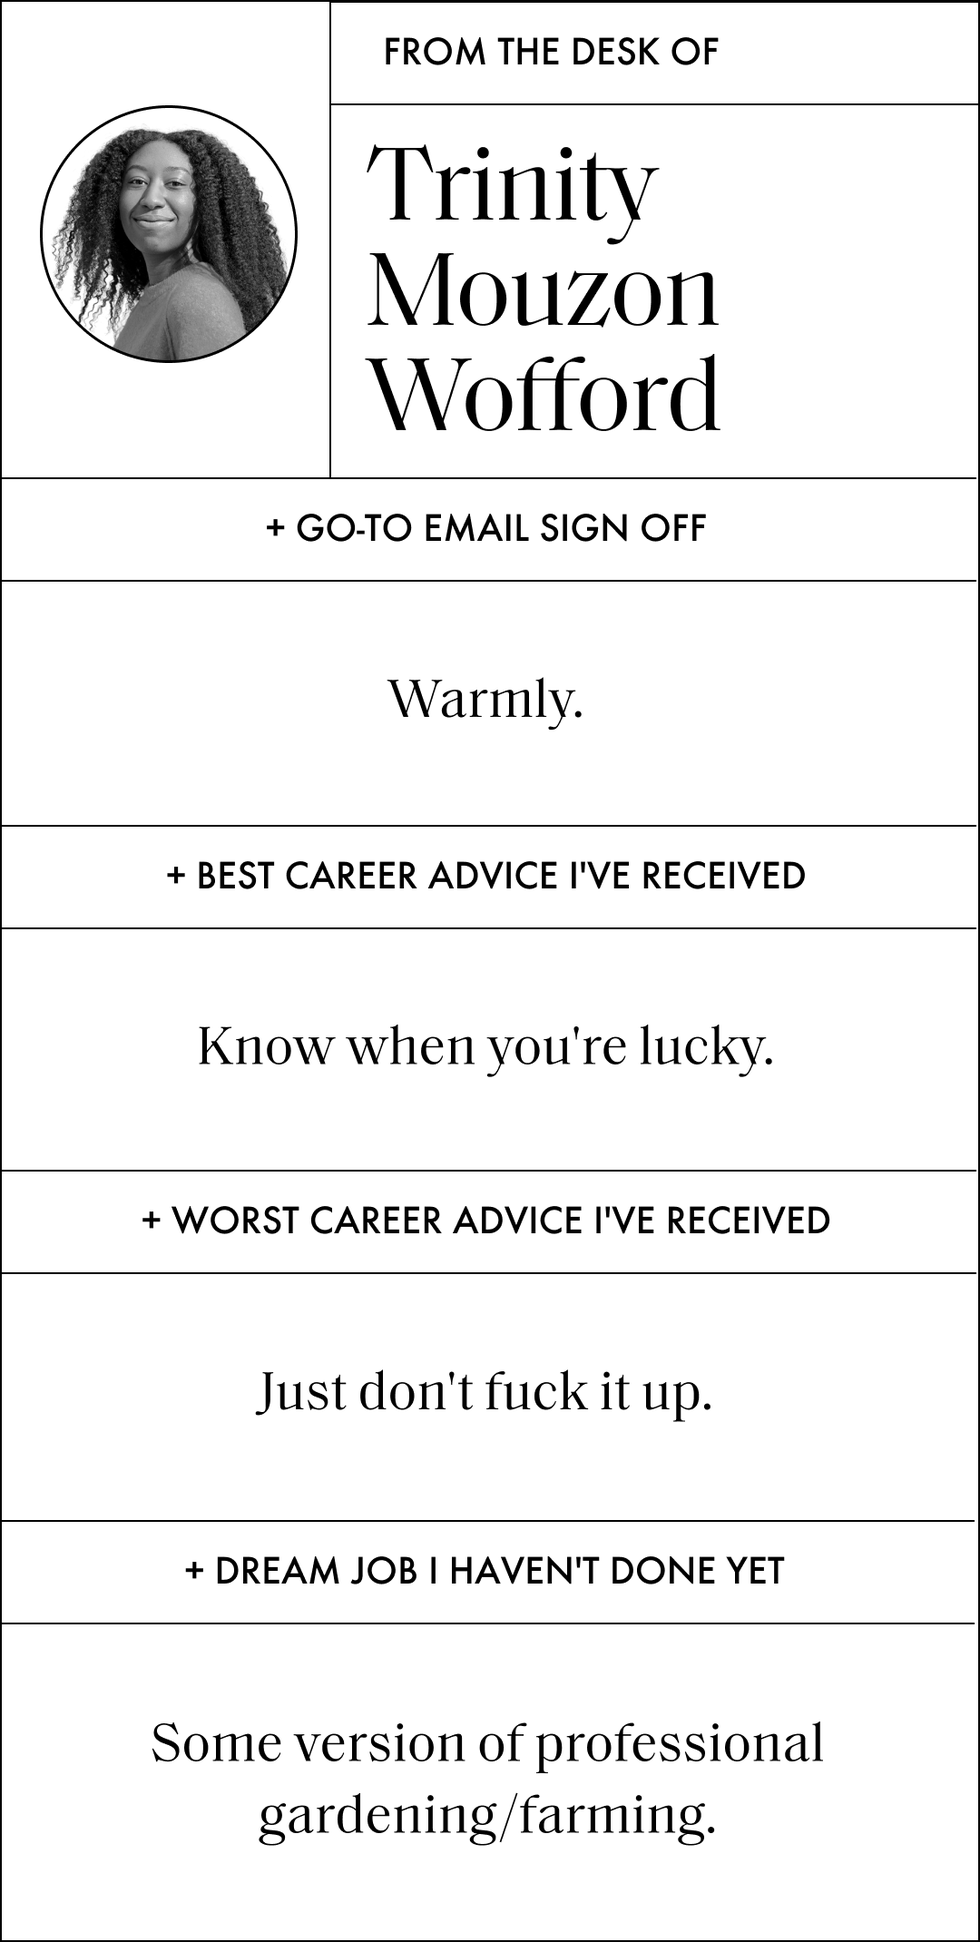 a graphic that says from the desk of trinity mouzon wofford and then has questions and answers that read

go to email sign off
warmly

best career advice i've received 
know when you're lucky

worst career advice i've received 
just don't fuck it up

dream job i haven't done yet
some version of professional gardening or farming